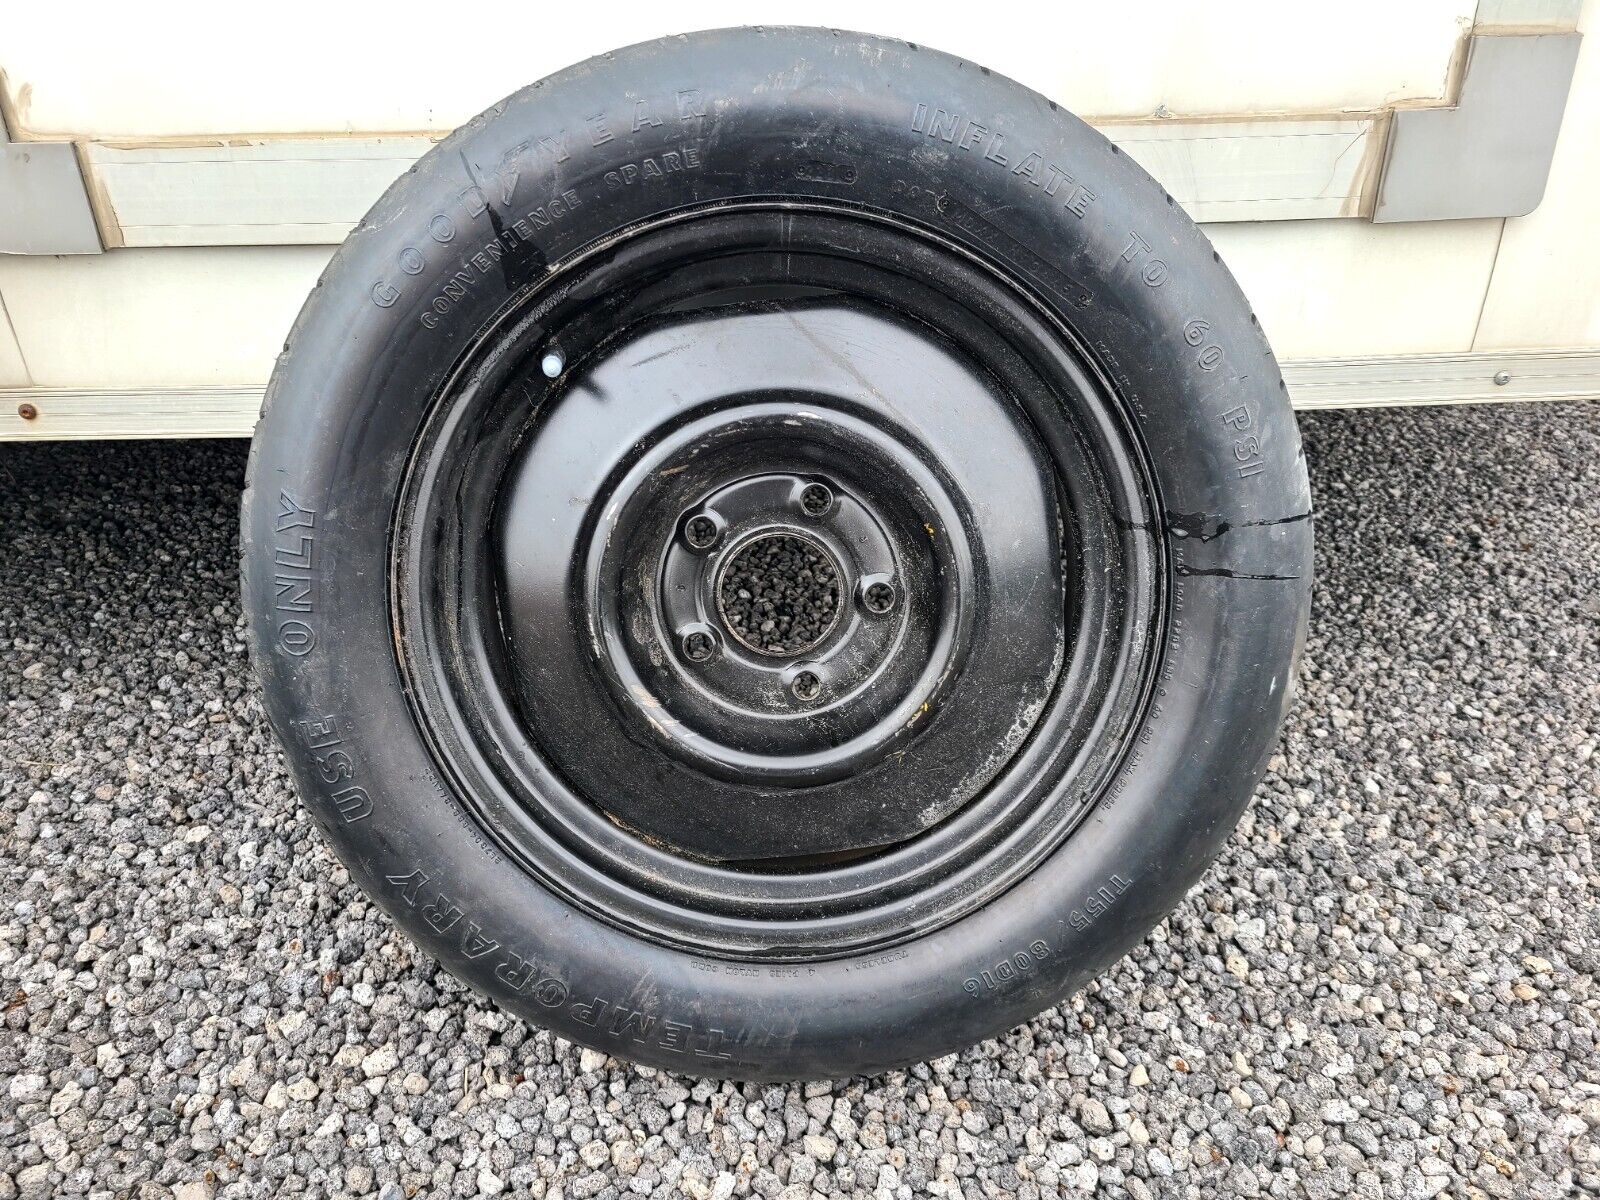 1986 Chevrolet Monte Carlo SS Goodyear OEM Convience Spare Tire T155/80D16